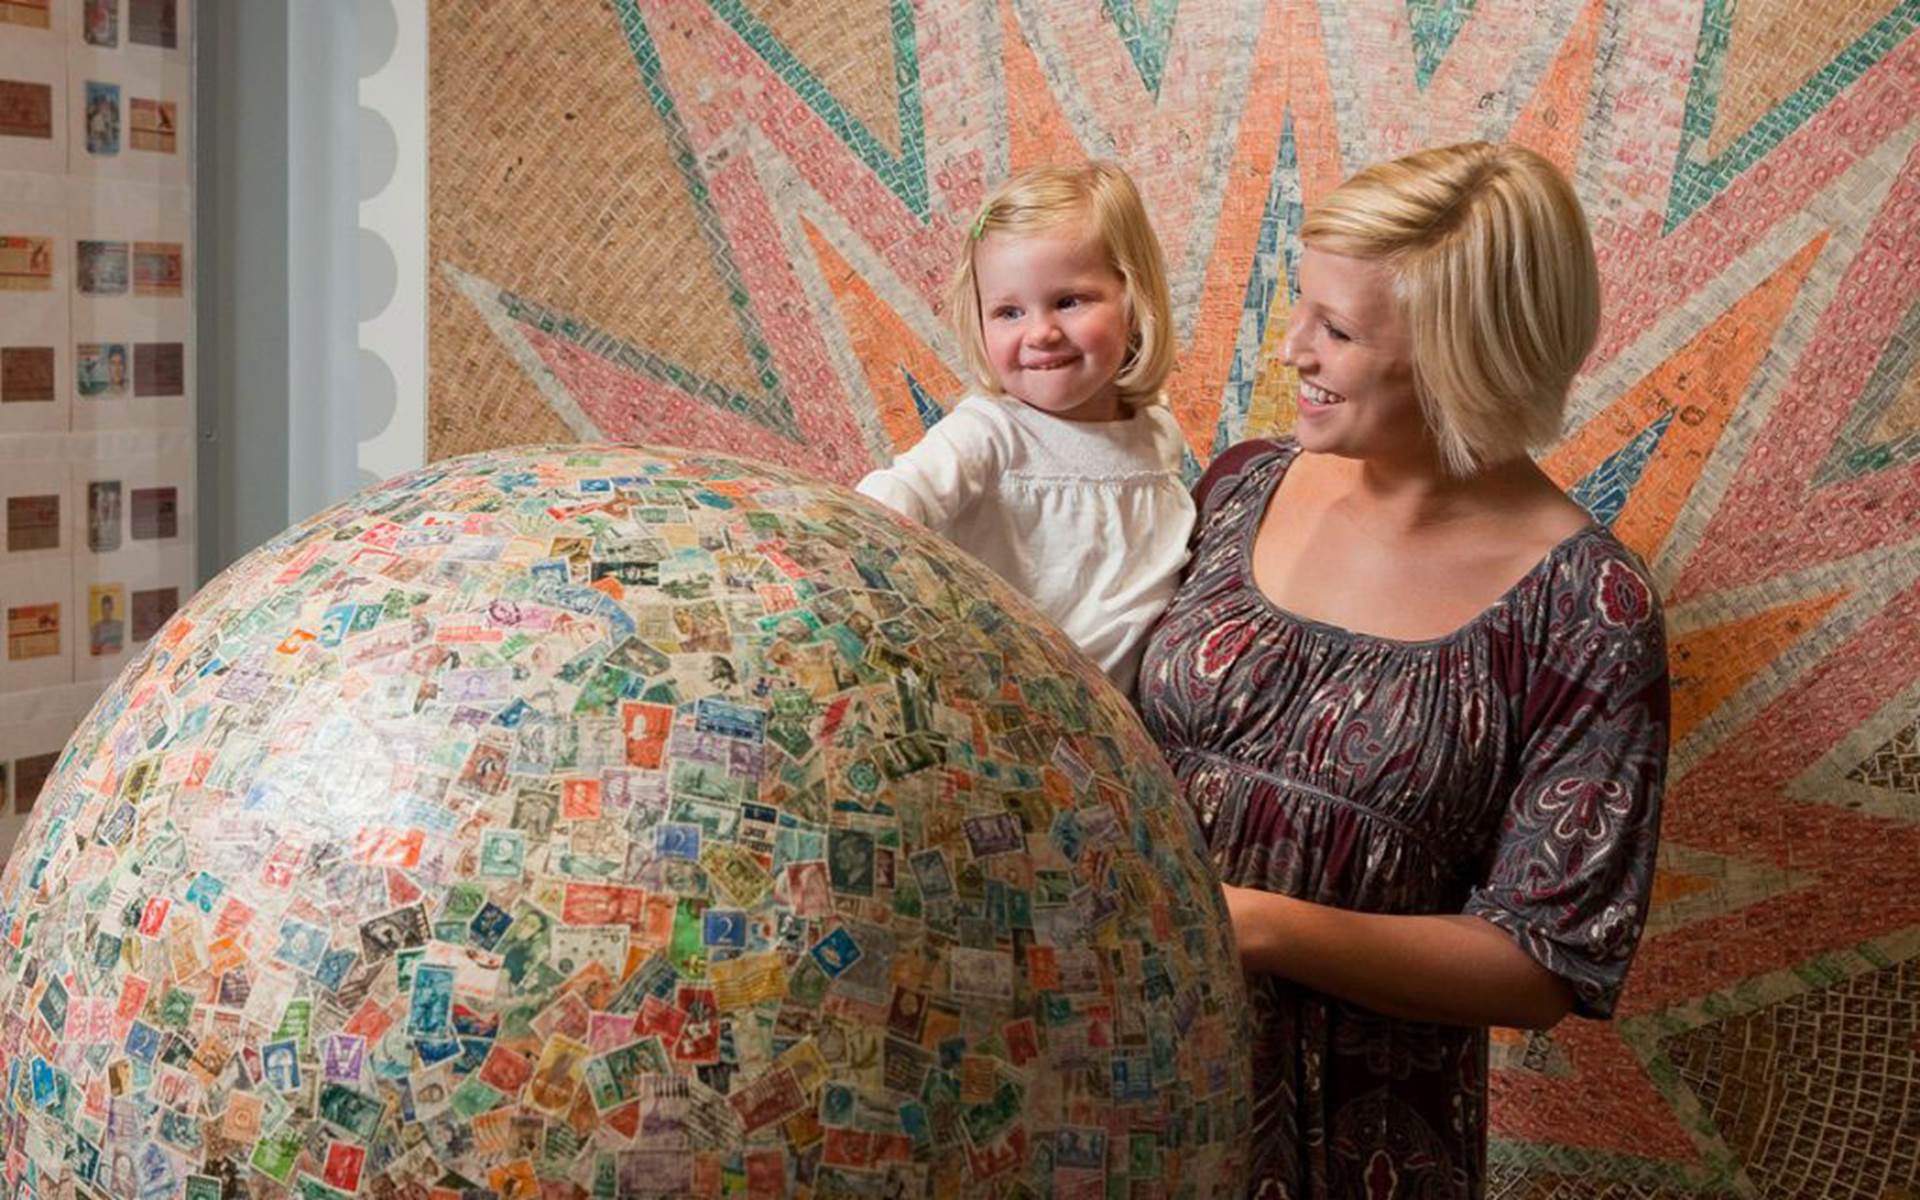 Mom holding daughter while looking at the worlds largest stamp ball